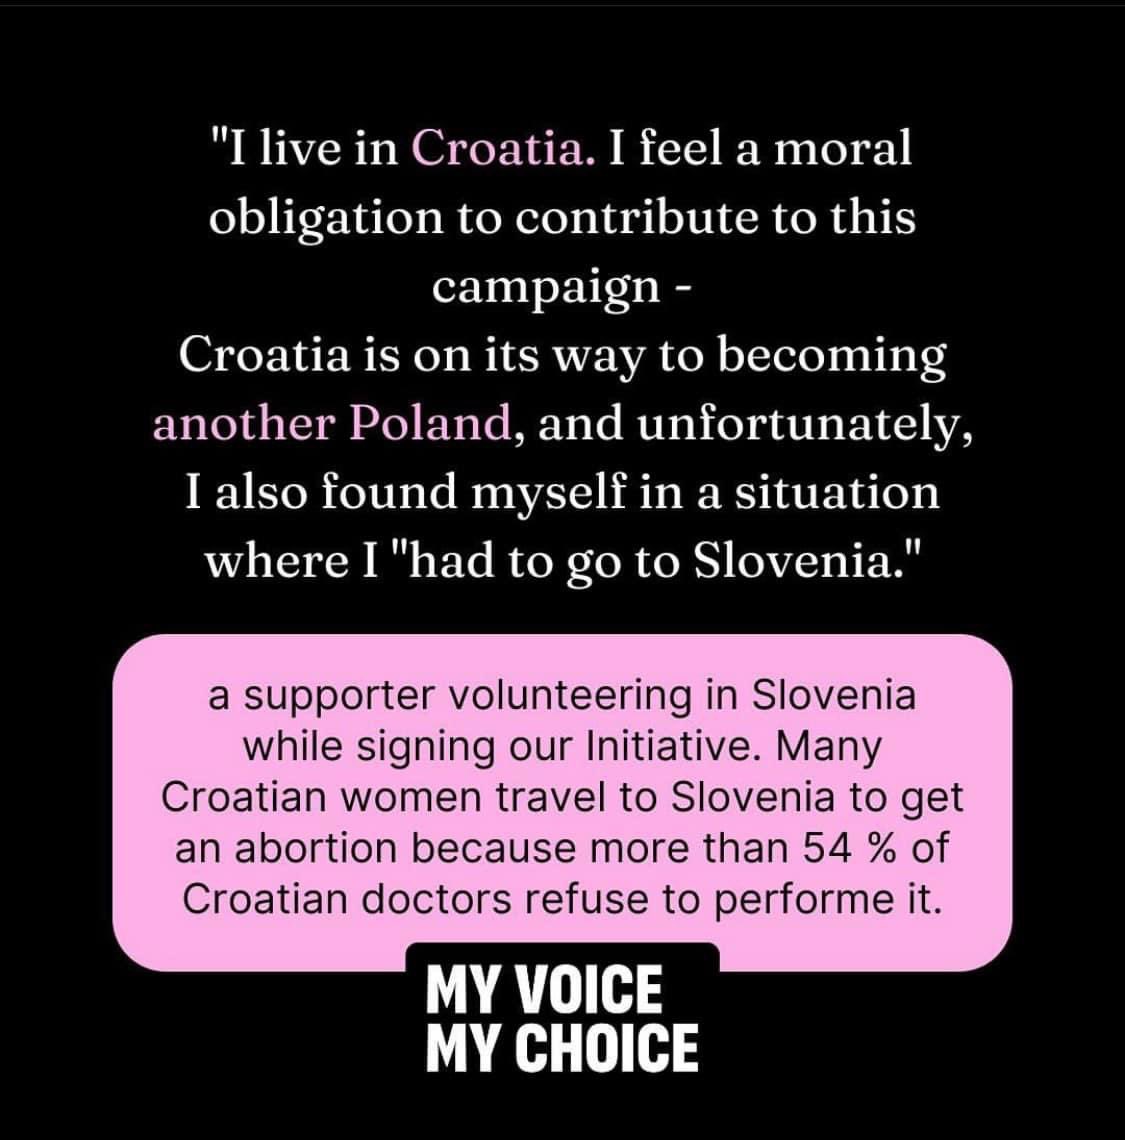 That's why your signature matters. Each signature demands that women who are forced to travel, for example from Croatia to Slovenia to get an abortion, wouldn't have to pay for it themselves. (1/2)